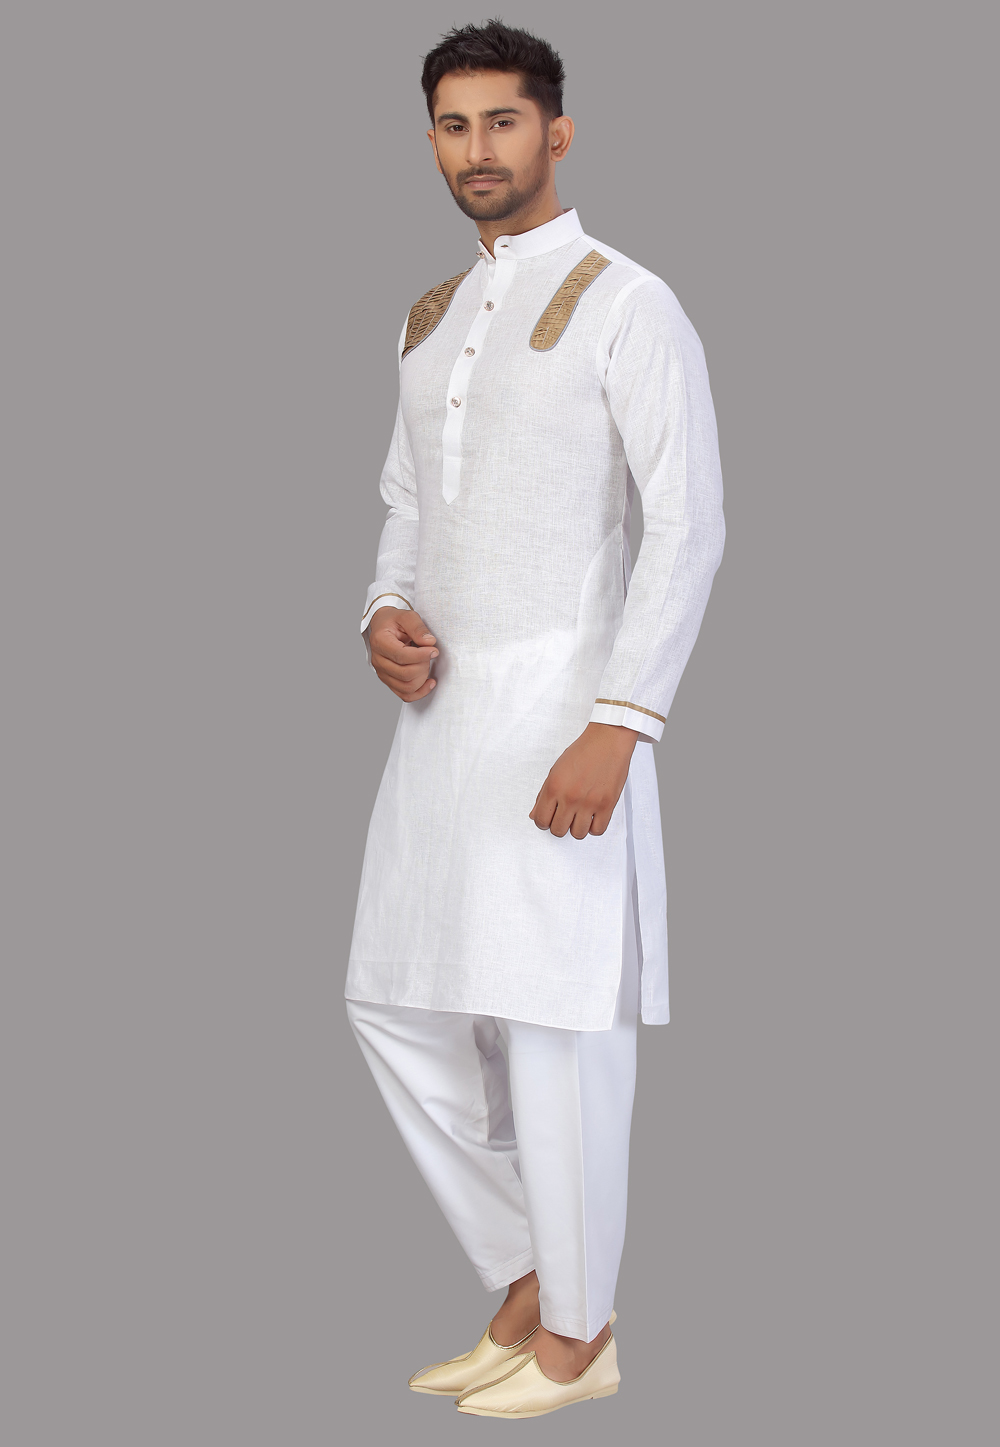 Party Wear White Mens Kurta Pajama With Jacket at Rs 2850/piece in Jaipur |  ID: 20351952230